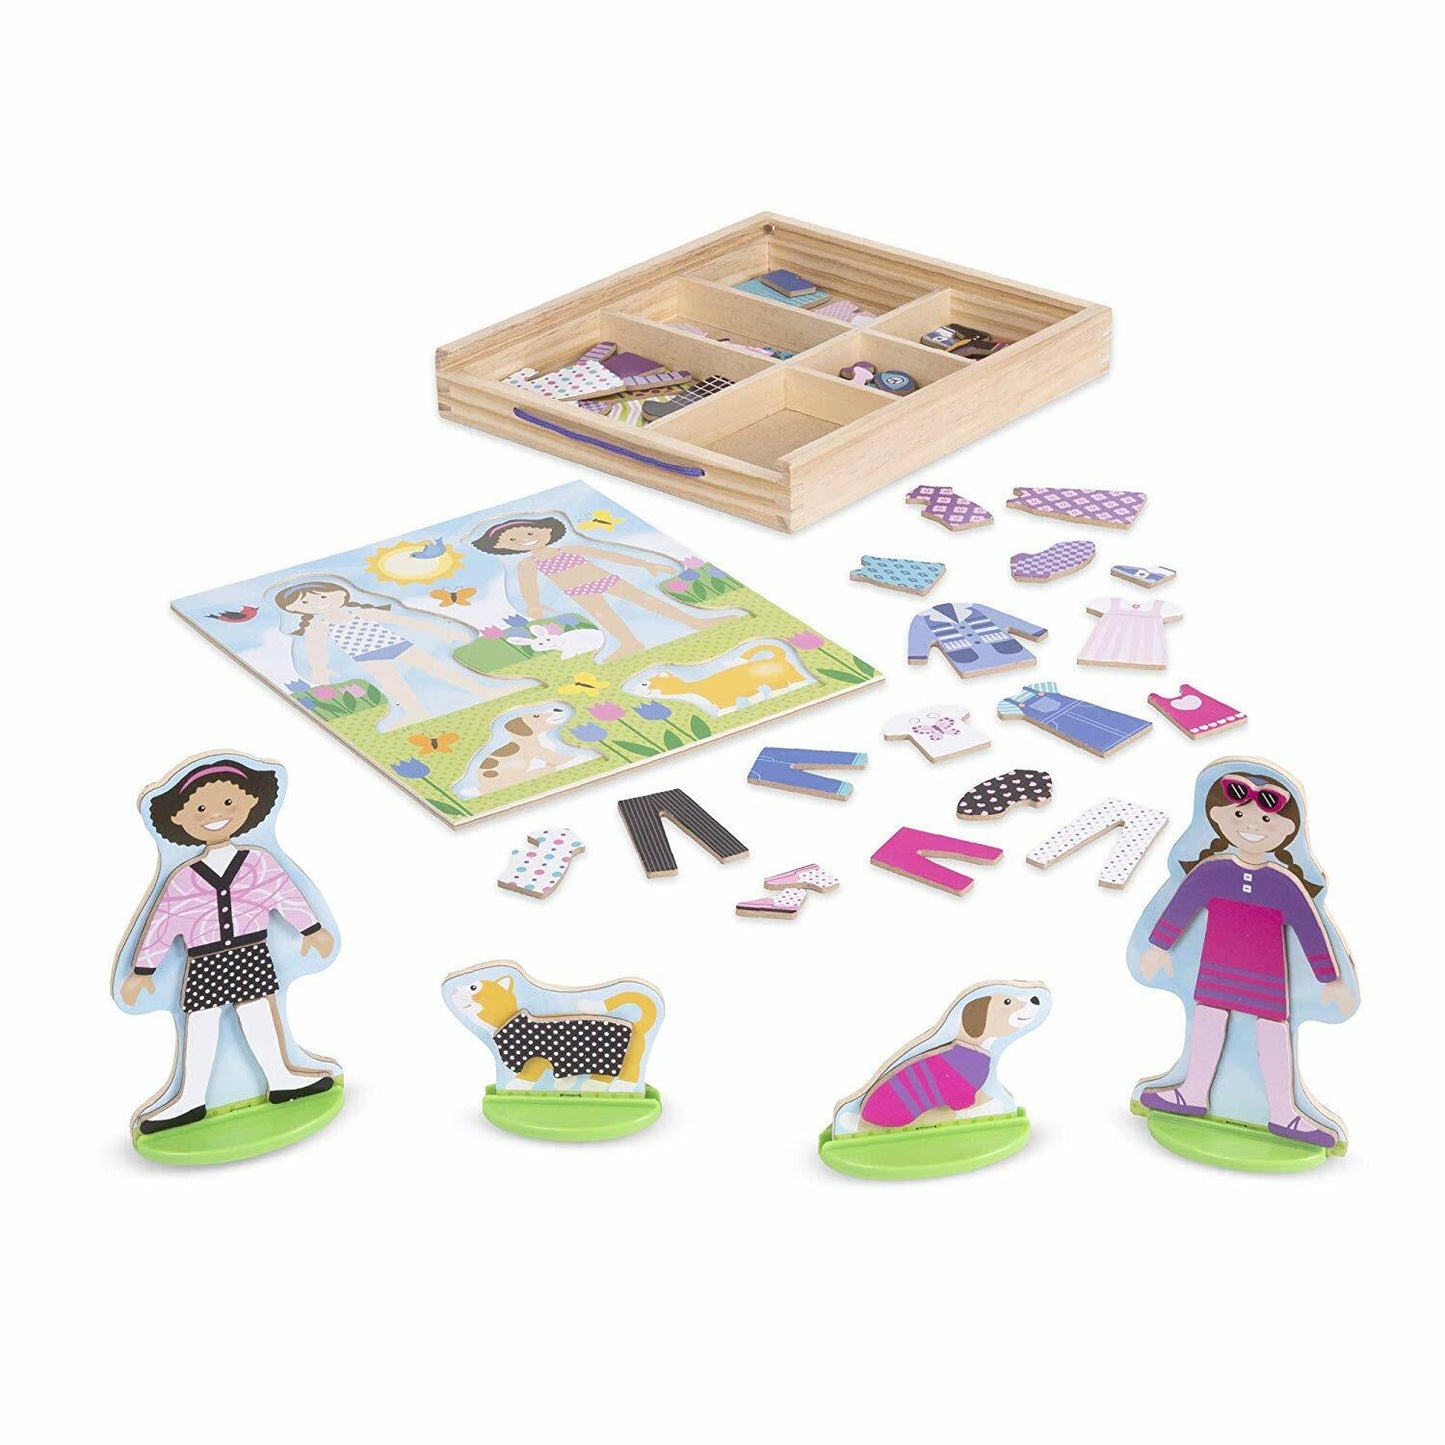 Melissa and Doug - Best Friends Magnetic Dress Up Play Set